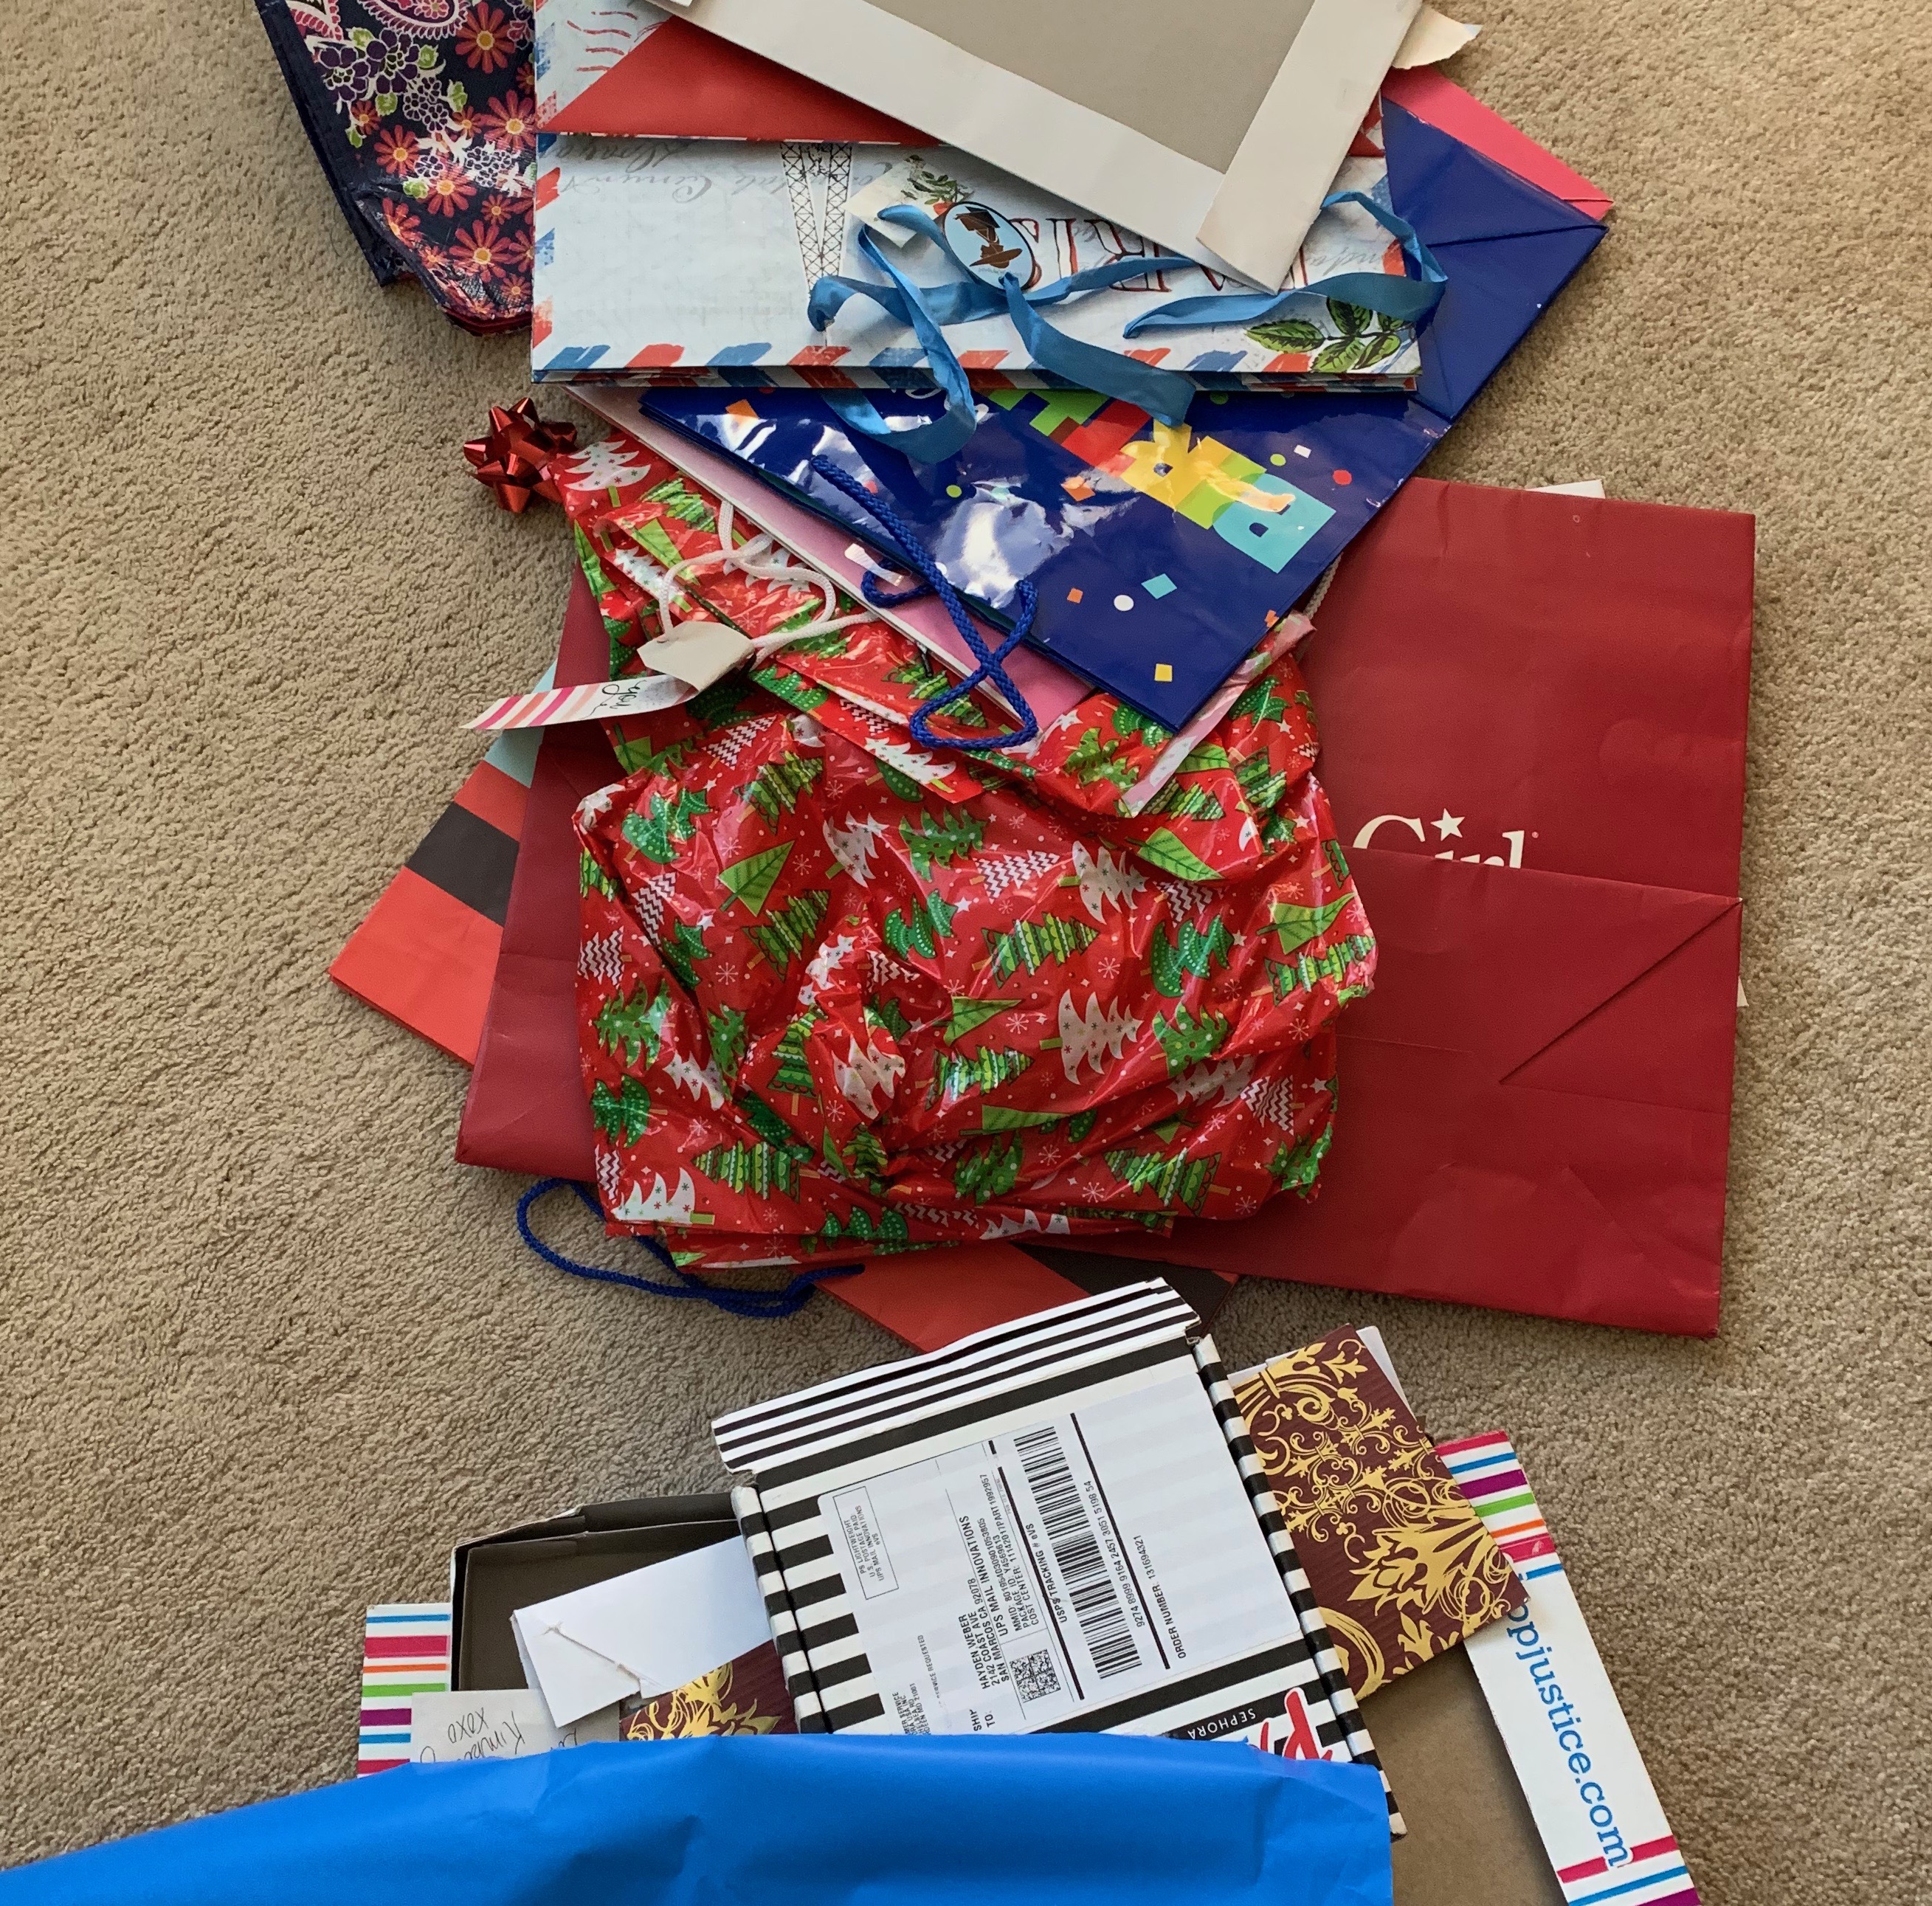 A pile of olf gift bags, boxes and wrapping paper